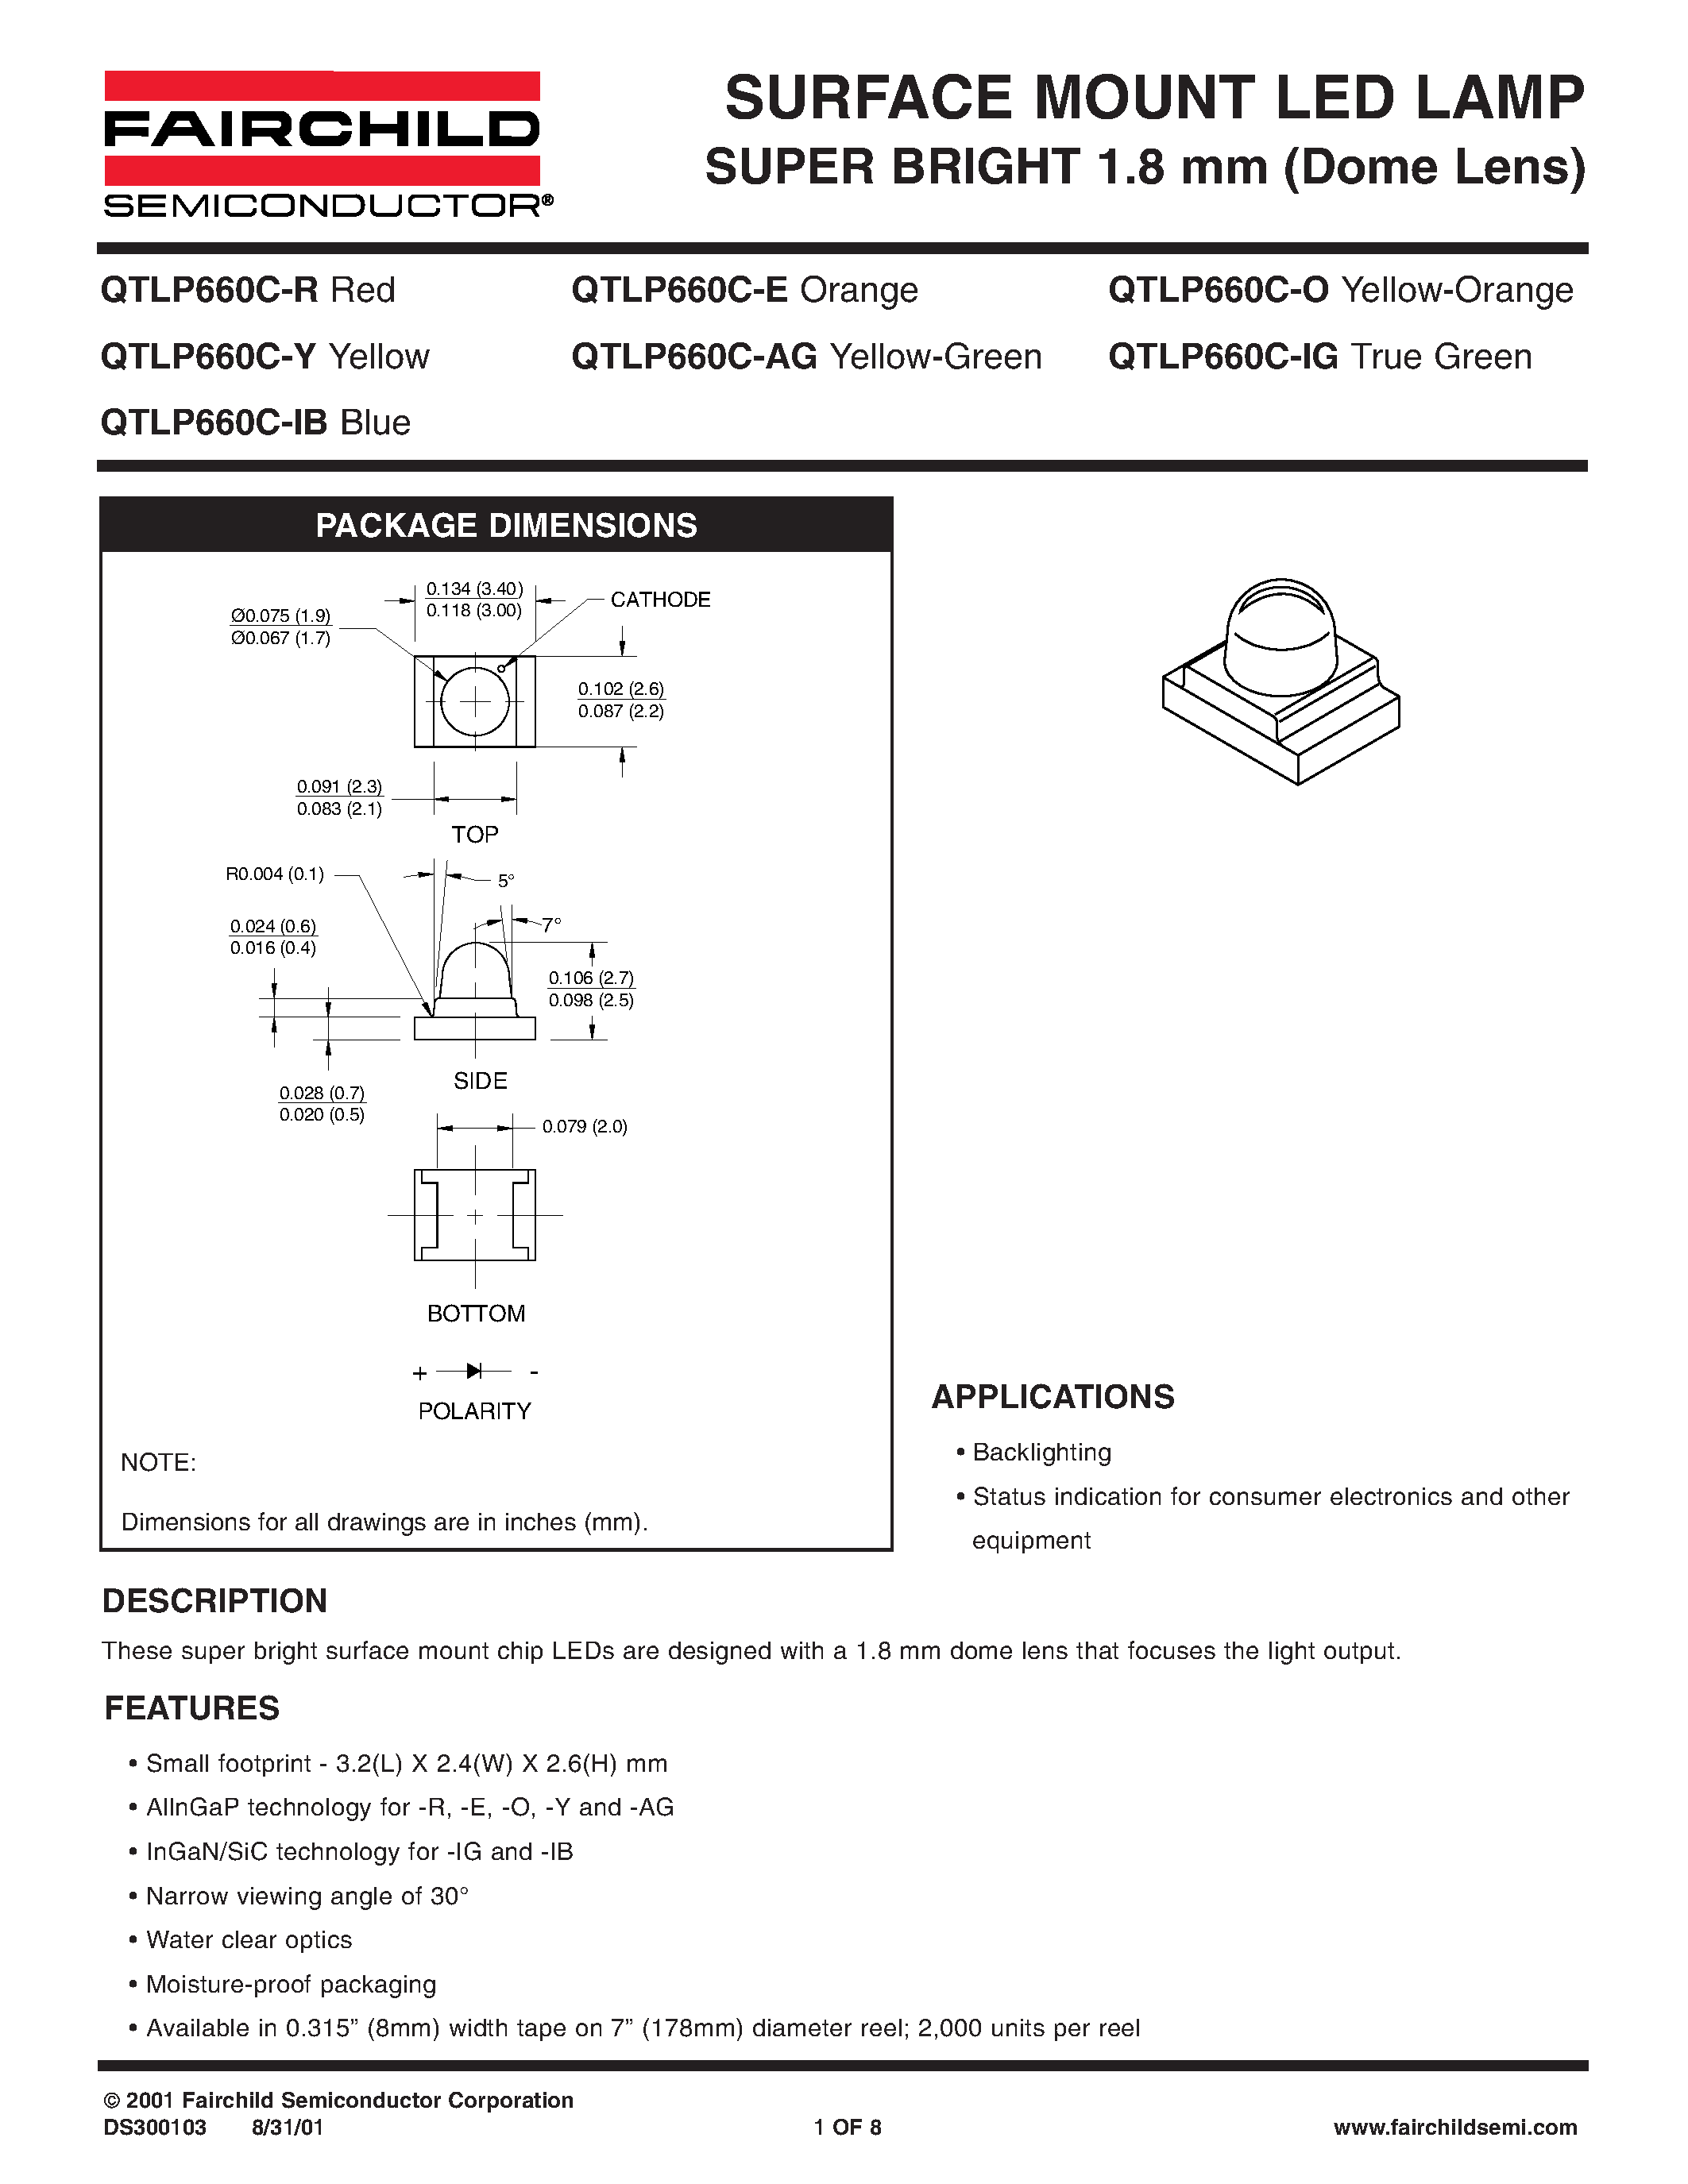 Datasheet QTLP660C-O - SURFACE MOUNT LED LAMP SUPER BRIGHT 1.8 mm (Dome Lens) page 1